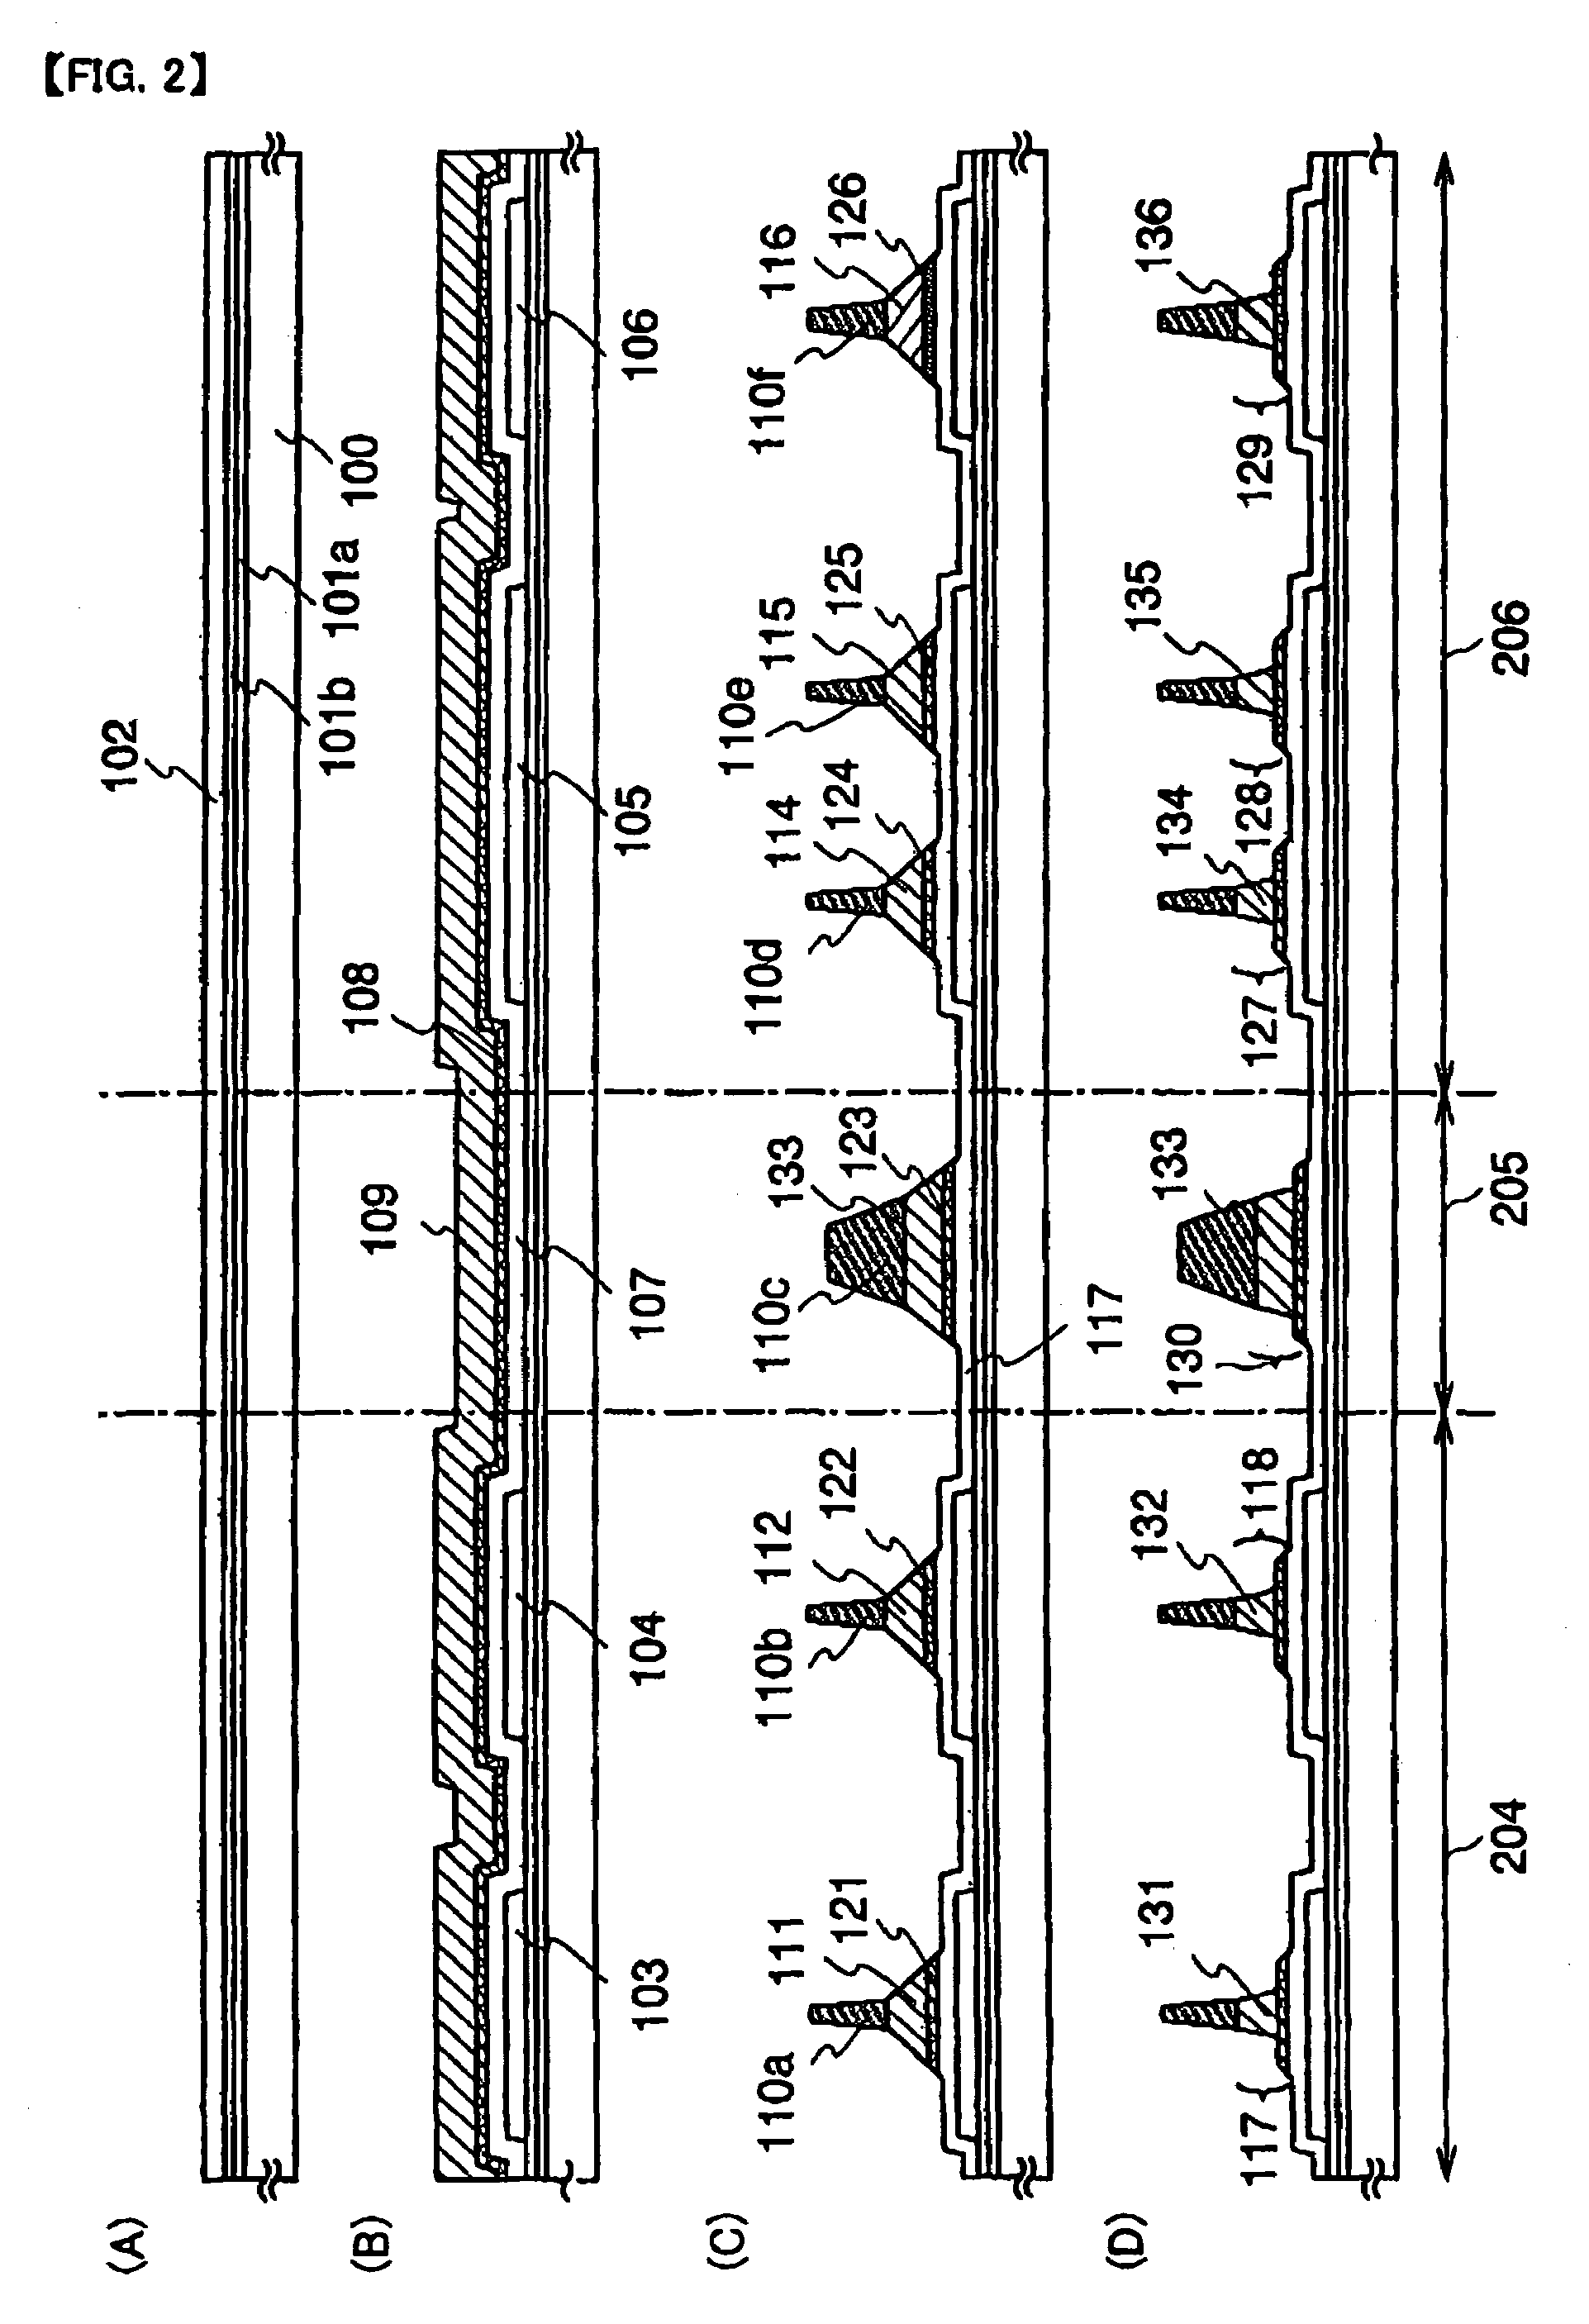 Method of fabricating the display device